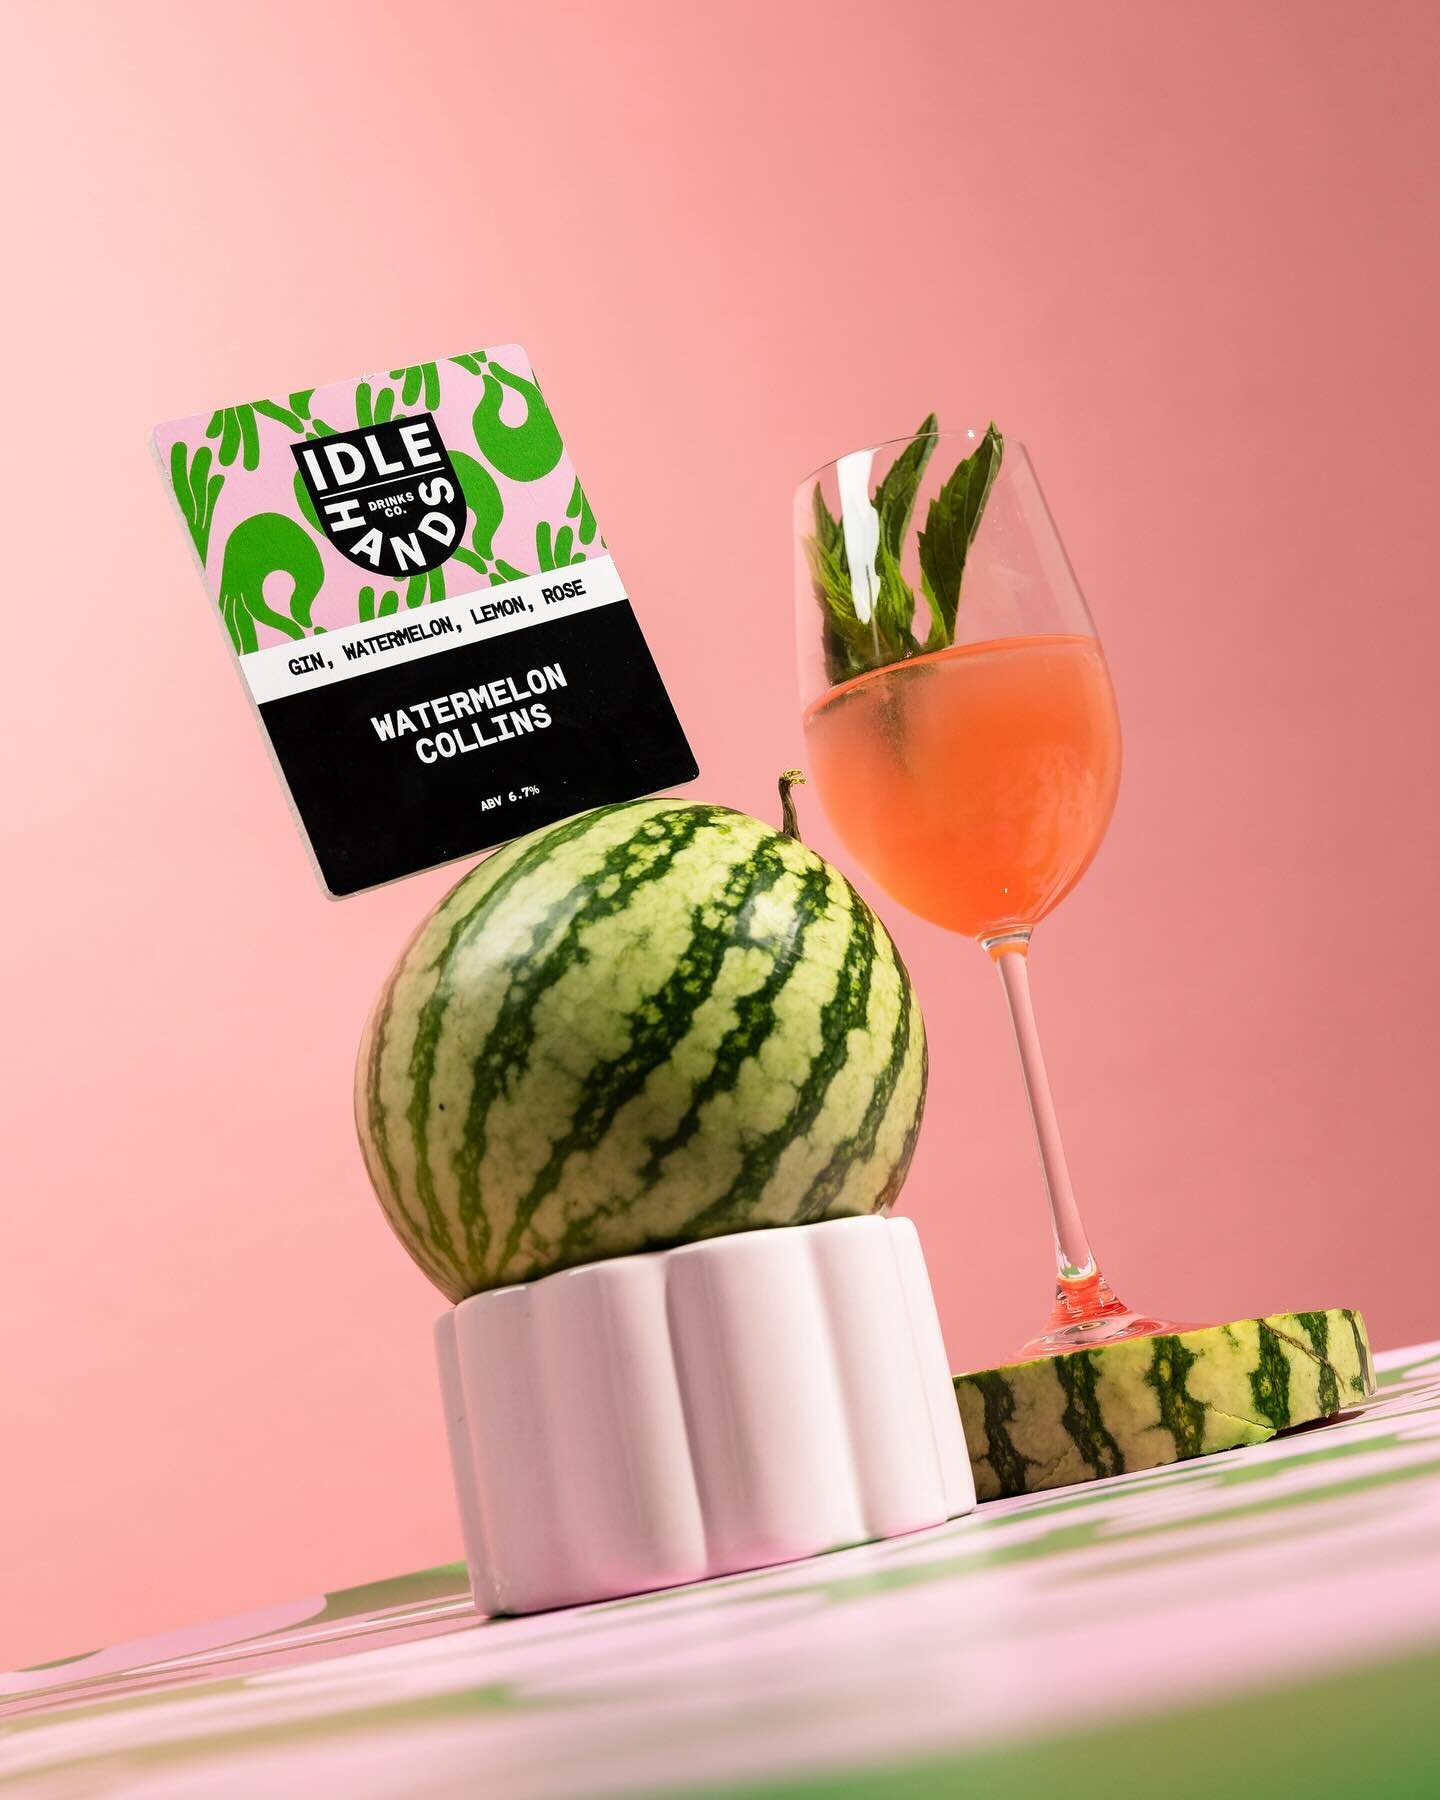 FIRST LOVE 💦💦 the OG Idle Hands cocktail! 

Australian dry gin, cold-pressed watermelon juice, citrus and a little touch of rose.

A juicy banger that&rsquo;s as close as you can get to crunching into a chunky slice of fresh watermelon. 

#idlehand